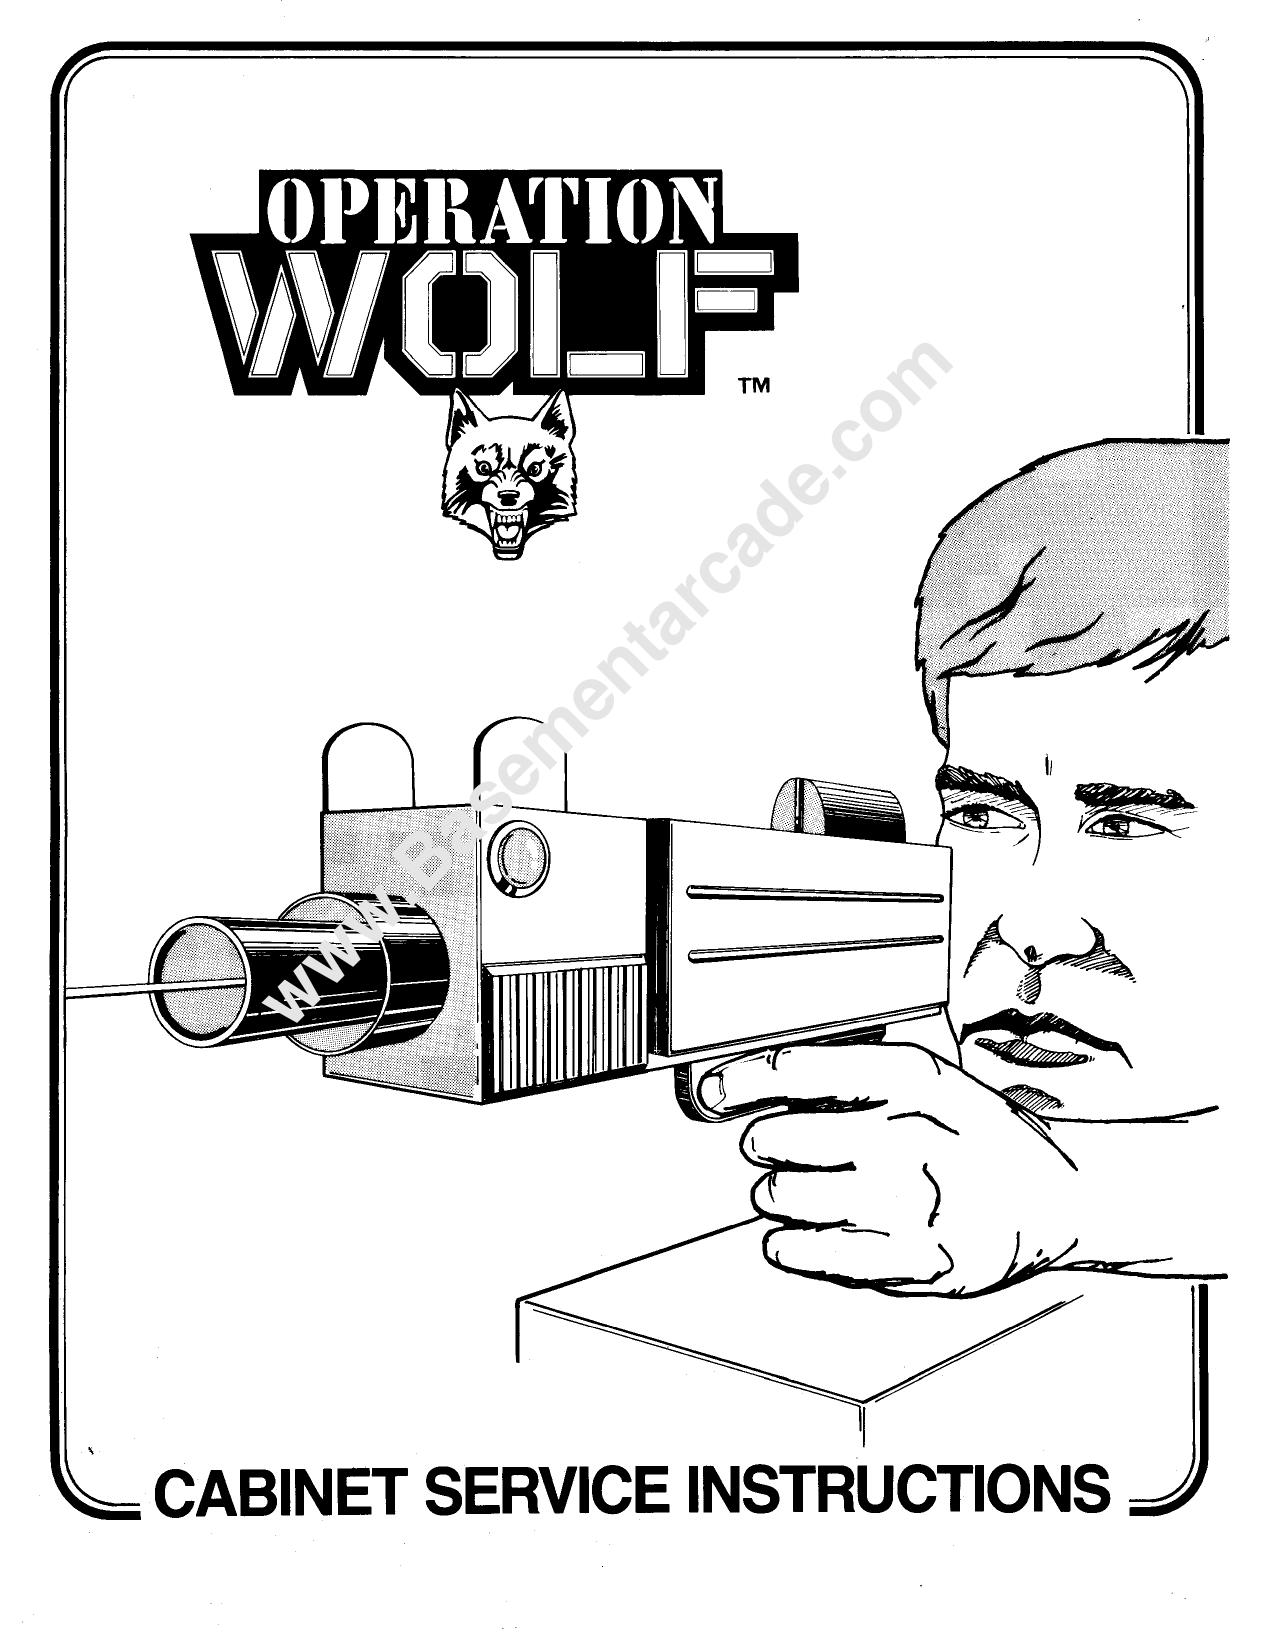 Operation Wolf Cabinet Service Manual